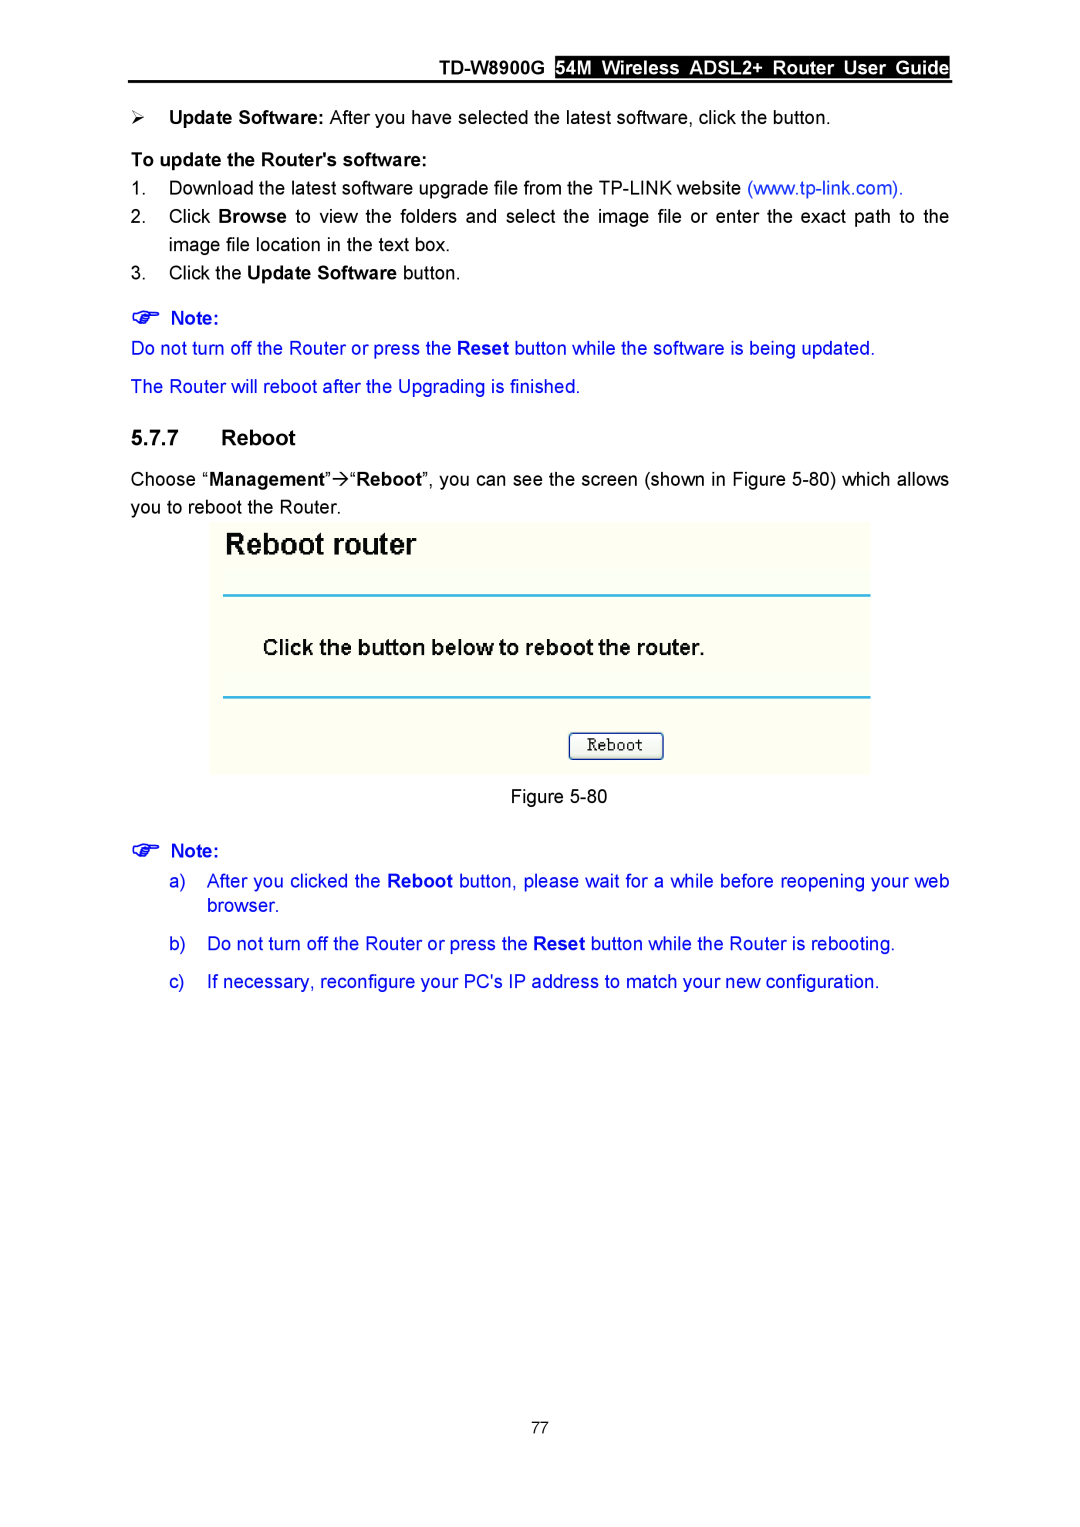 TP-Link manual Reboot, TD-W8900G 54M Wireless ADSL2+ Router User Guide, To update the Routers software 